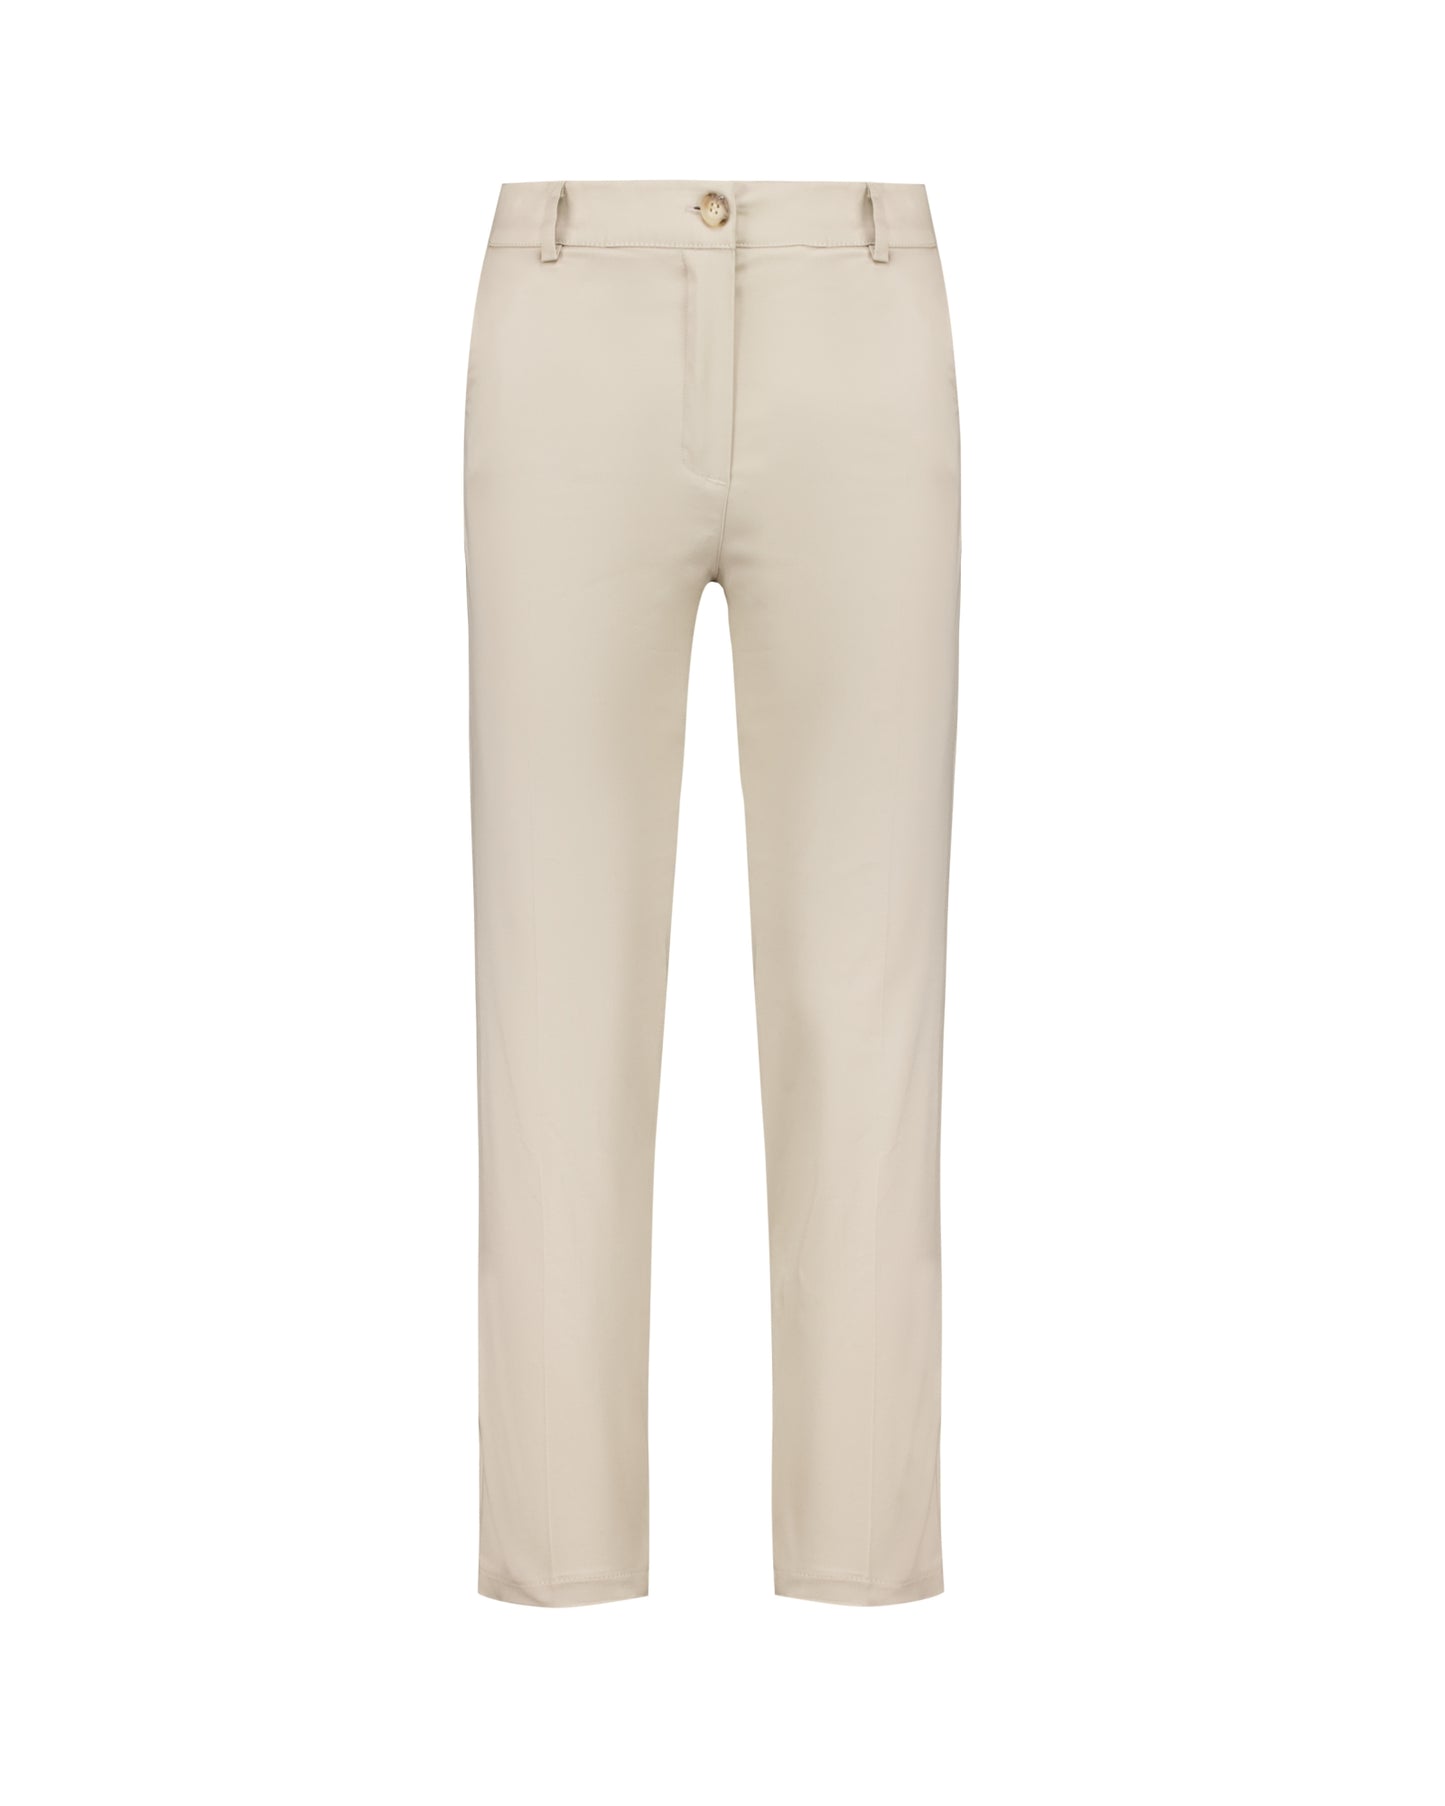 Milson Carrie Pant - Biscuit